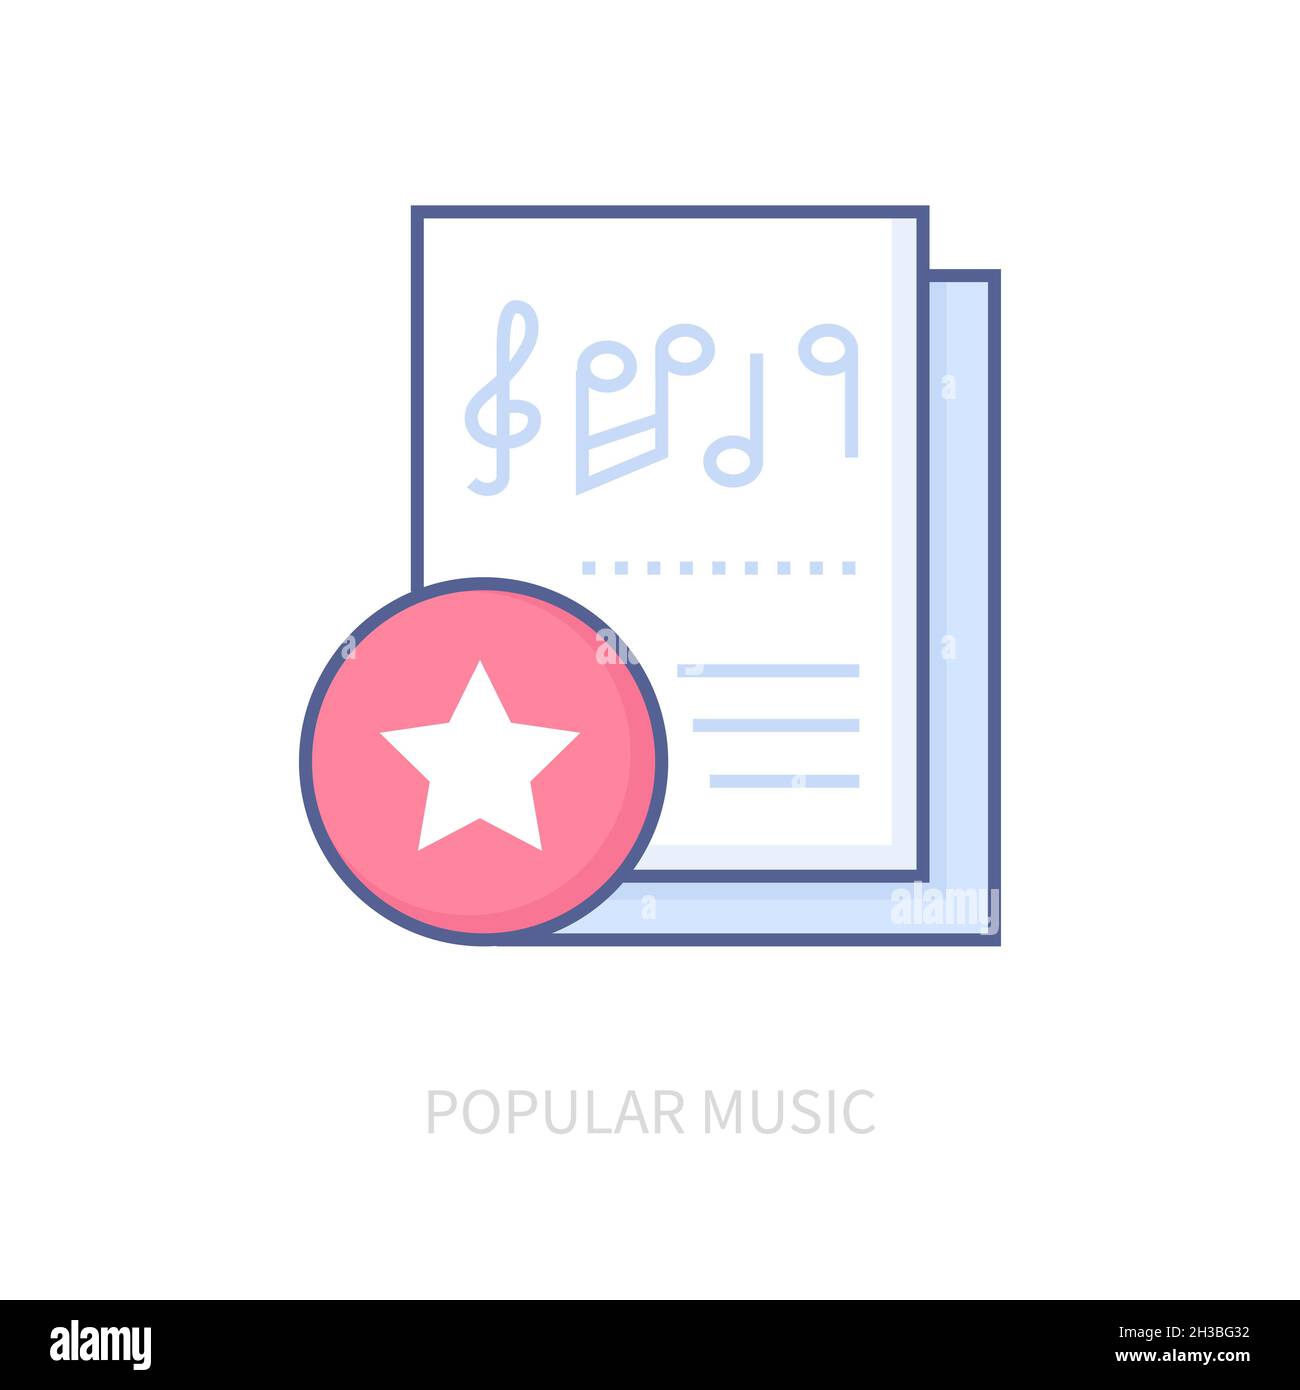 Popular music - modern line design style icon on white background. Neat detailed image of star rated sheet music. Sheet music, treble clef, stave, mel Stock Vector